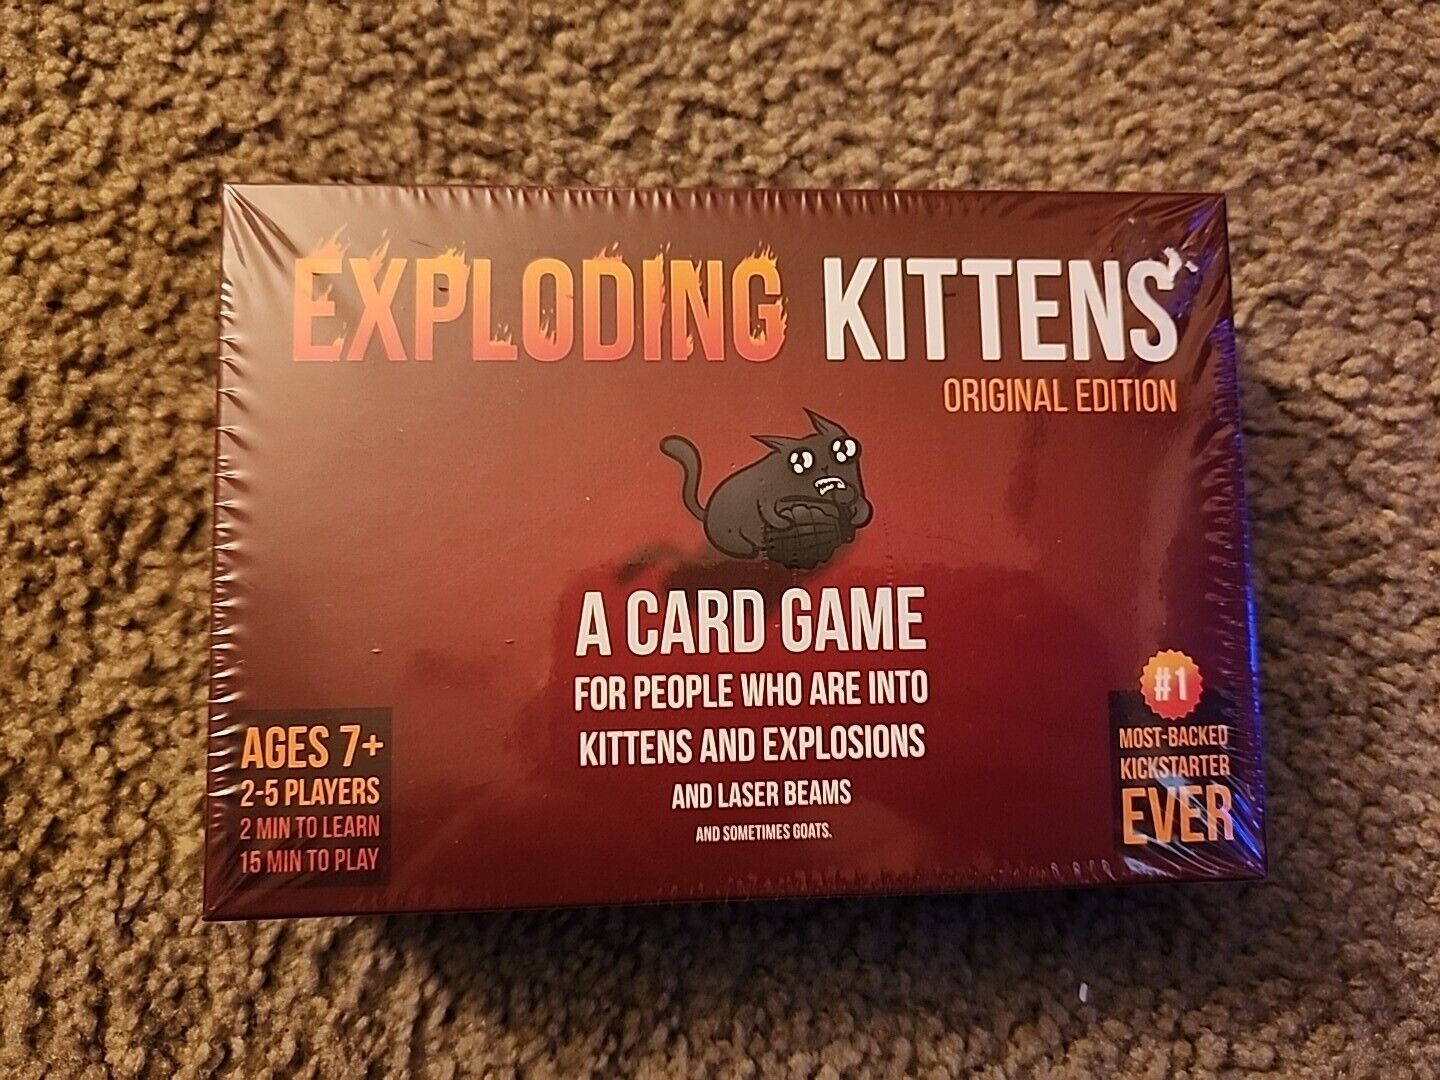 Exploding Kittens Party Card Game Original Edition (Brand New Sealed)